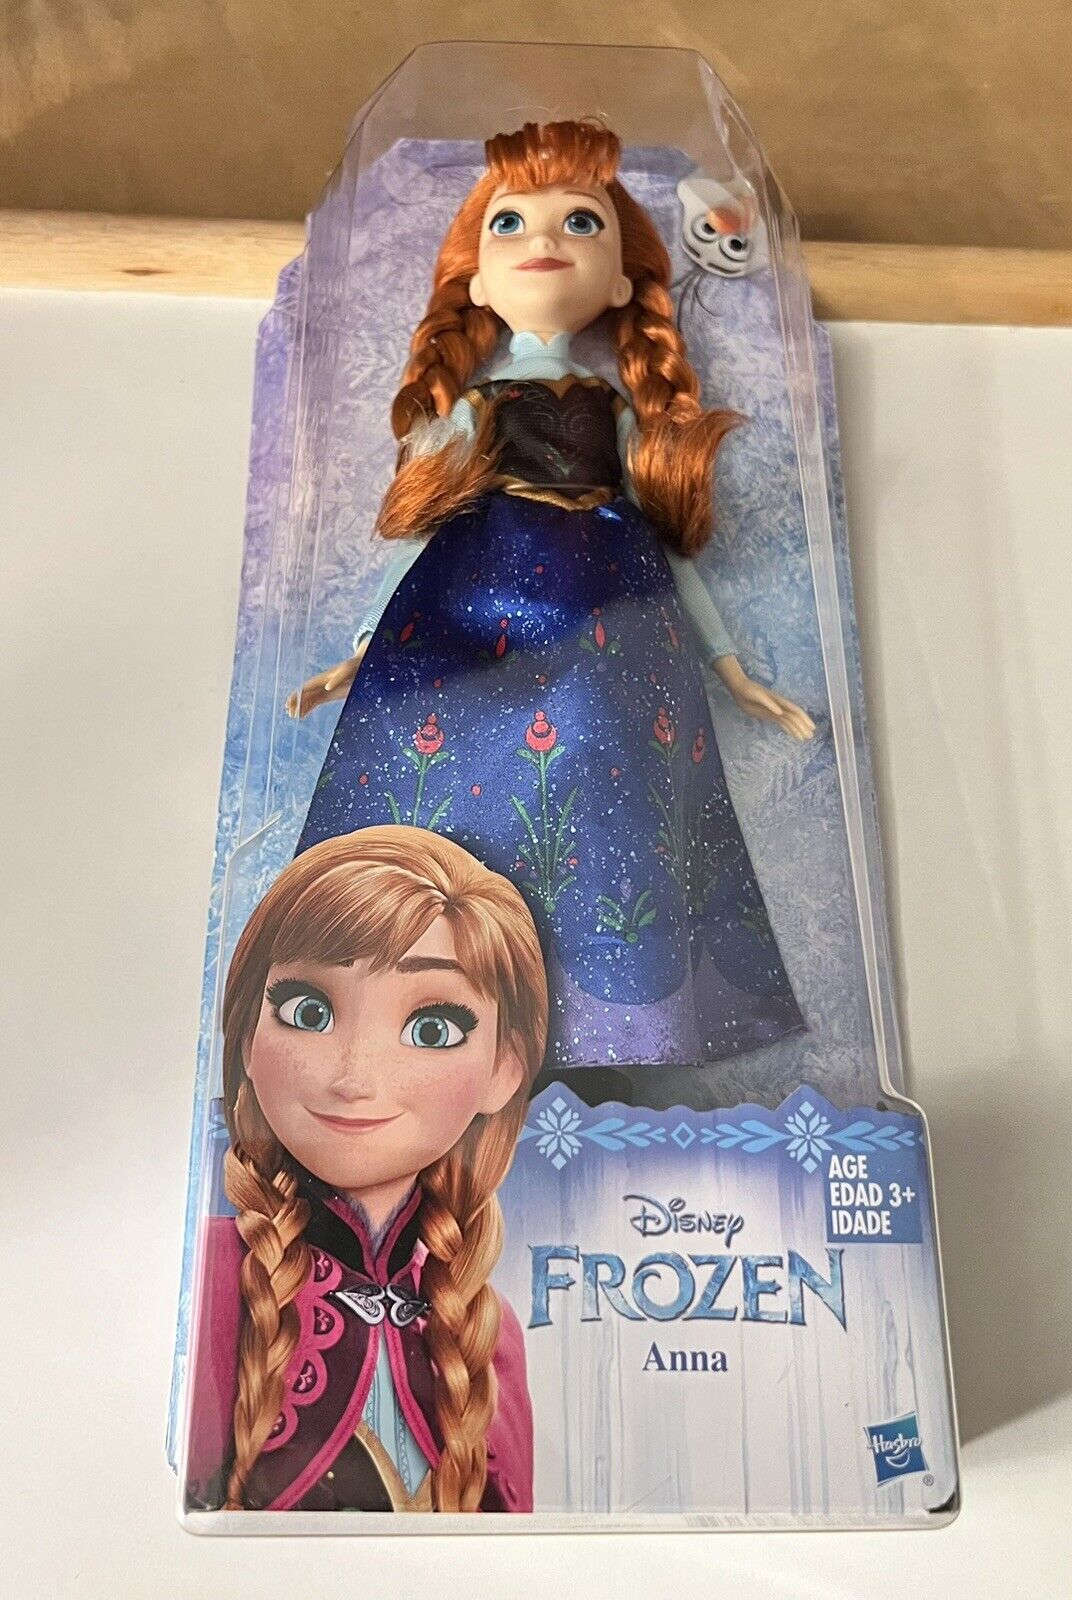 NIB Disney Frozen Anna doll Hasbro Includes Shoes, Doll & Outfit